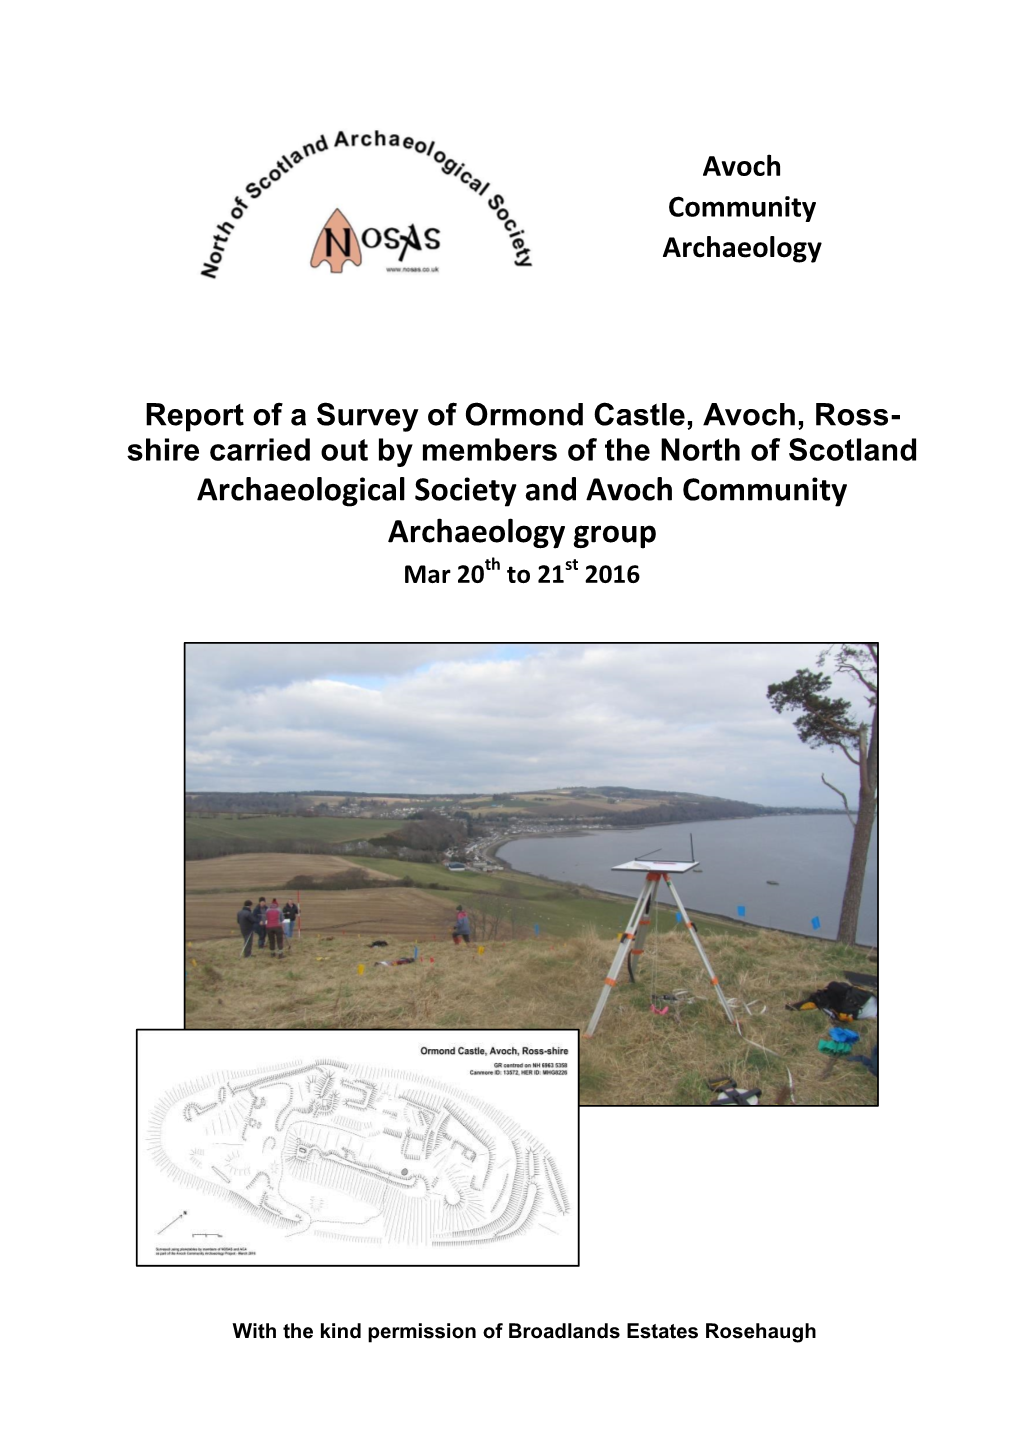 Archaeological Society and Avoch Community Archaeology Group Th St Mar 20 to 21 2016